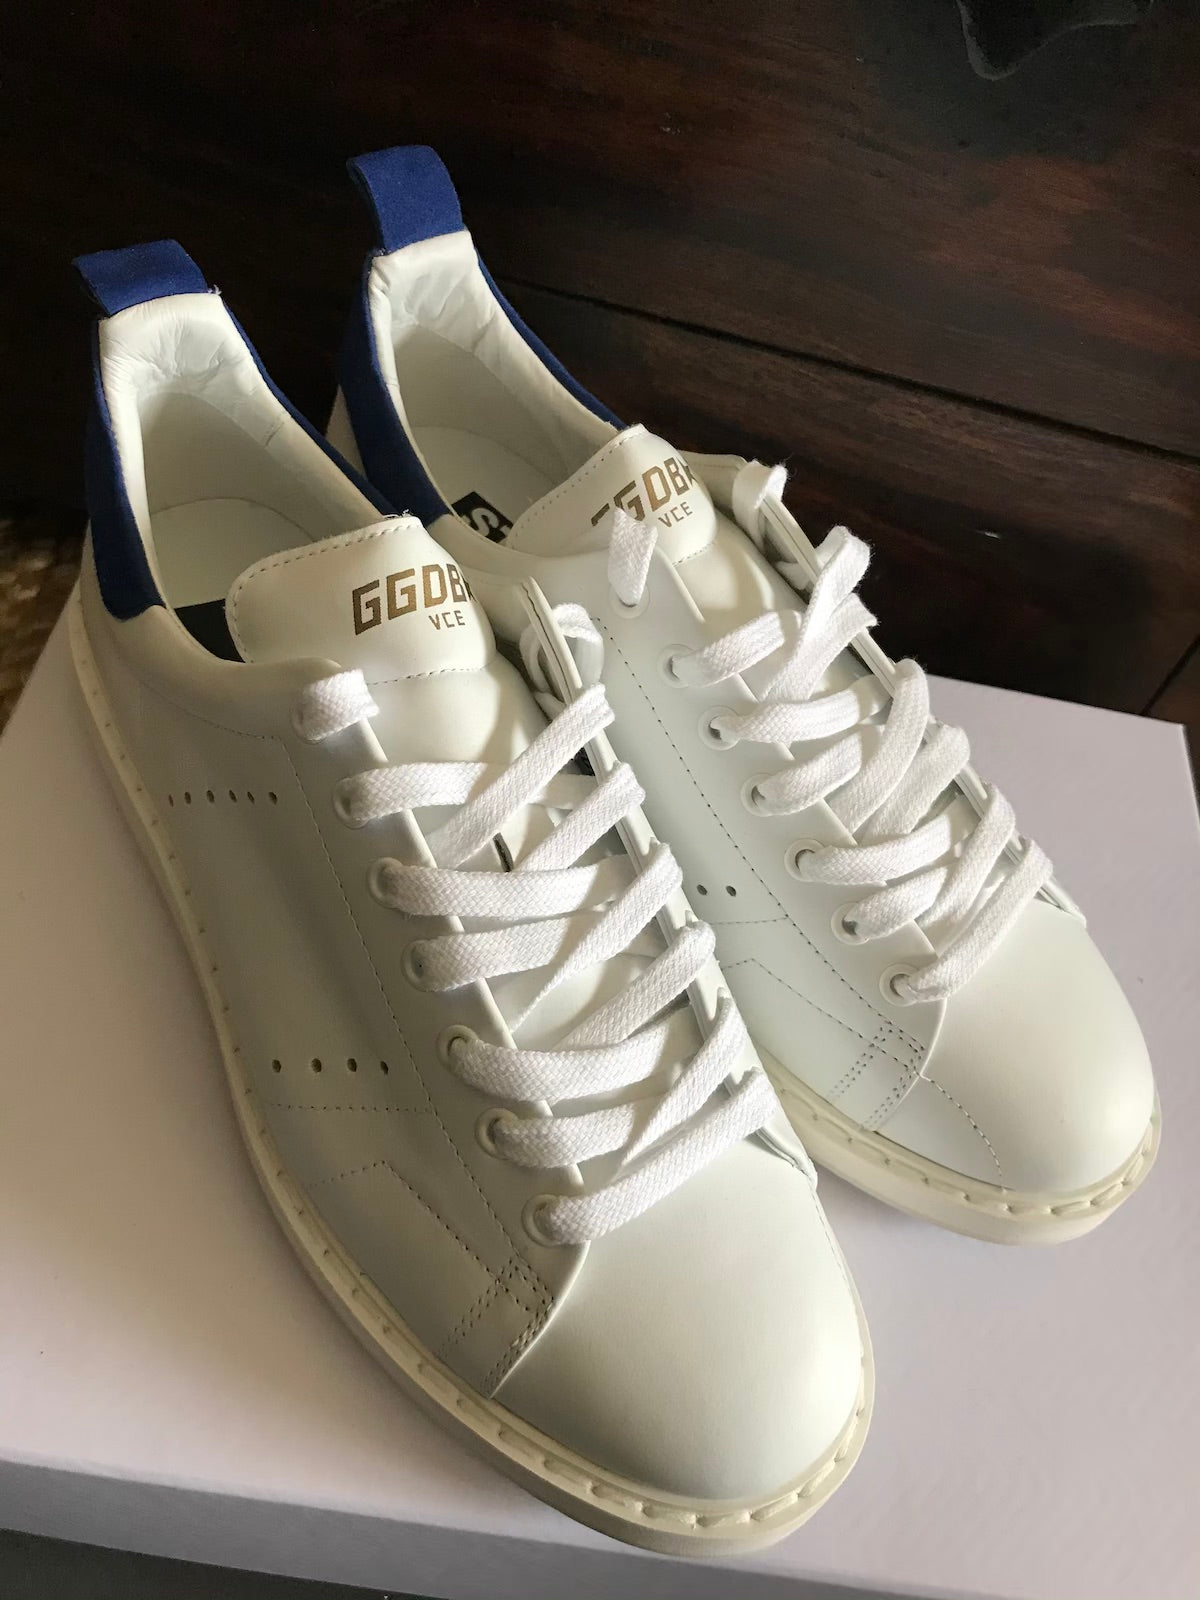 Starter sneakers in leather with navy heel tab